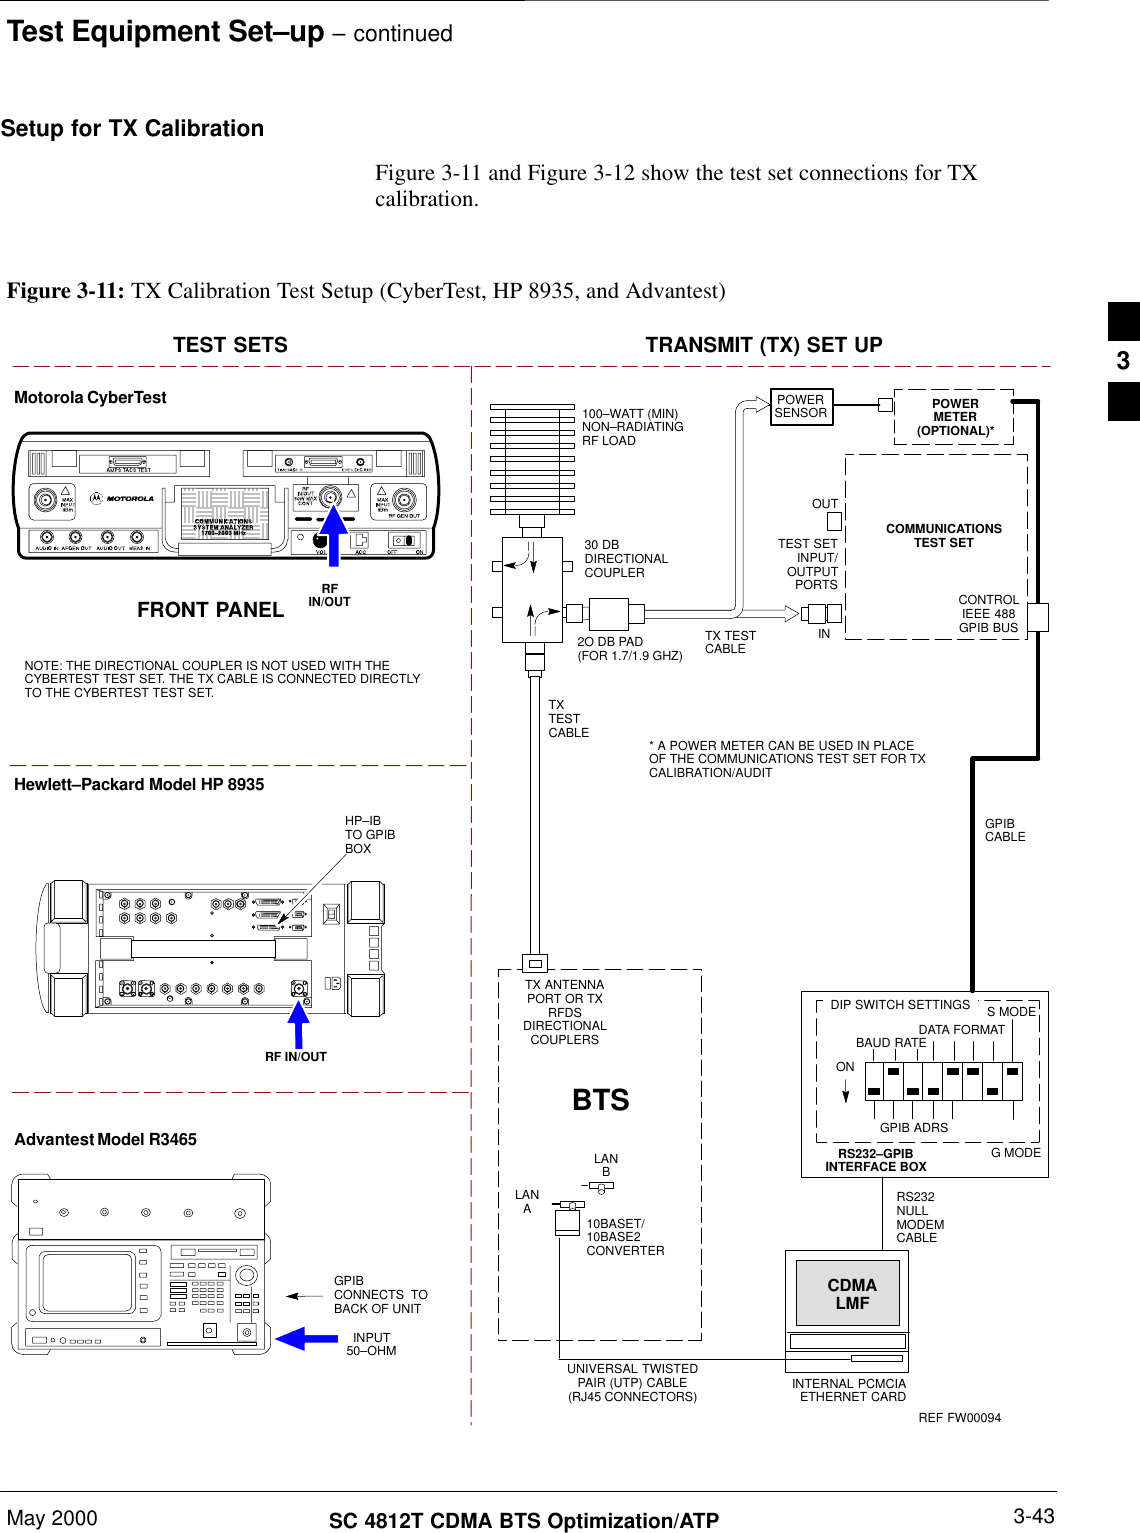 Test Equipment Set–up – continuedMay 2000 3-43SC 4812T CDMA BTS Optimization/ATPSetup for TX CalibrationFigure 3-11 and Figure 3-12 show the test set connections for TXcalibration.Motorola CyberTestHewlett–Packard Model HP 8935TEST SETS TRANSMIT (TX) SET UPFRONT PANEL RFIN/OUTRF IN/OUTHP–IBTO GPIBBOXRS232–GPIBINTERFACE BOXINTERNAL PCMCIAETHERNET CARDGPIBCABLECOMMUNICATIONSTEST SETCONTROLIEEE 488GPIB BUSUNIVERSAL TWISTEDPAIR (UTP) CABLE(RJ45 CONNECTORS)RS232NULLMODEMCABLEOUTS MODEDATA FORMATBAUD RATEGPIB ADRSG MODEONTEST SETINPUT/OUTPUTPORTSBTS100–WATT (MIN)NON–RADIATINGRF LOADINTXTESTCABLECDMALMFDIP SWITCH SETTINGS2O DB PAD(FOR 1.7/1.9 GHZ)10BASET/10BASE2CONVERTERLANBLANATX TESTCABLETX ANTENNAPORT OR TXRFDSDIRECTIONALCOUPLERSPOWERMETER(OPTIONAL)*NOTE: THE DIRECTIONAL COUPLER IS NOT USED WITH THECYBERTEST TEST SET. THE TX CABLE IS CONNECTED DIRECTLYTO THE CYBERTEST TEST SET.Advantest Model R3465INPUT50–OHMGPIBCONNECTS  TOBACK OF UNIT* A POWER METER CAN BE USED IN PLACEOF THE COMMUNICATIONS TEST SET FOR TXCALIBRATION/AUDITPOWERSENSORFigure 3-11: TX Calibration Test Setup (CyberTest, HP 8935, and Advantest)REF FW0009430 DBDIRECTIONALCOUPLER3